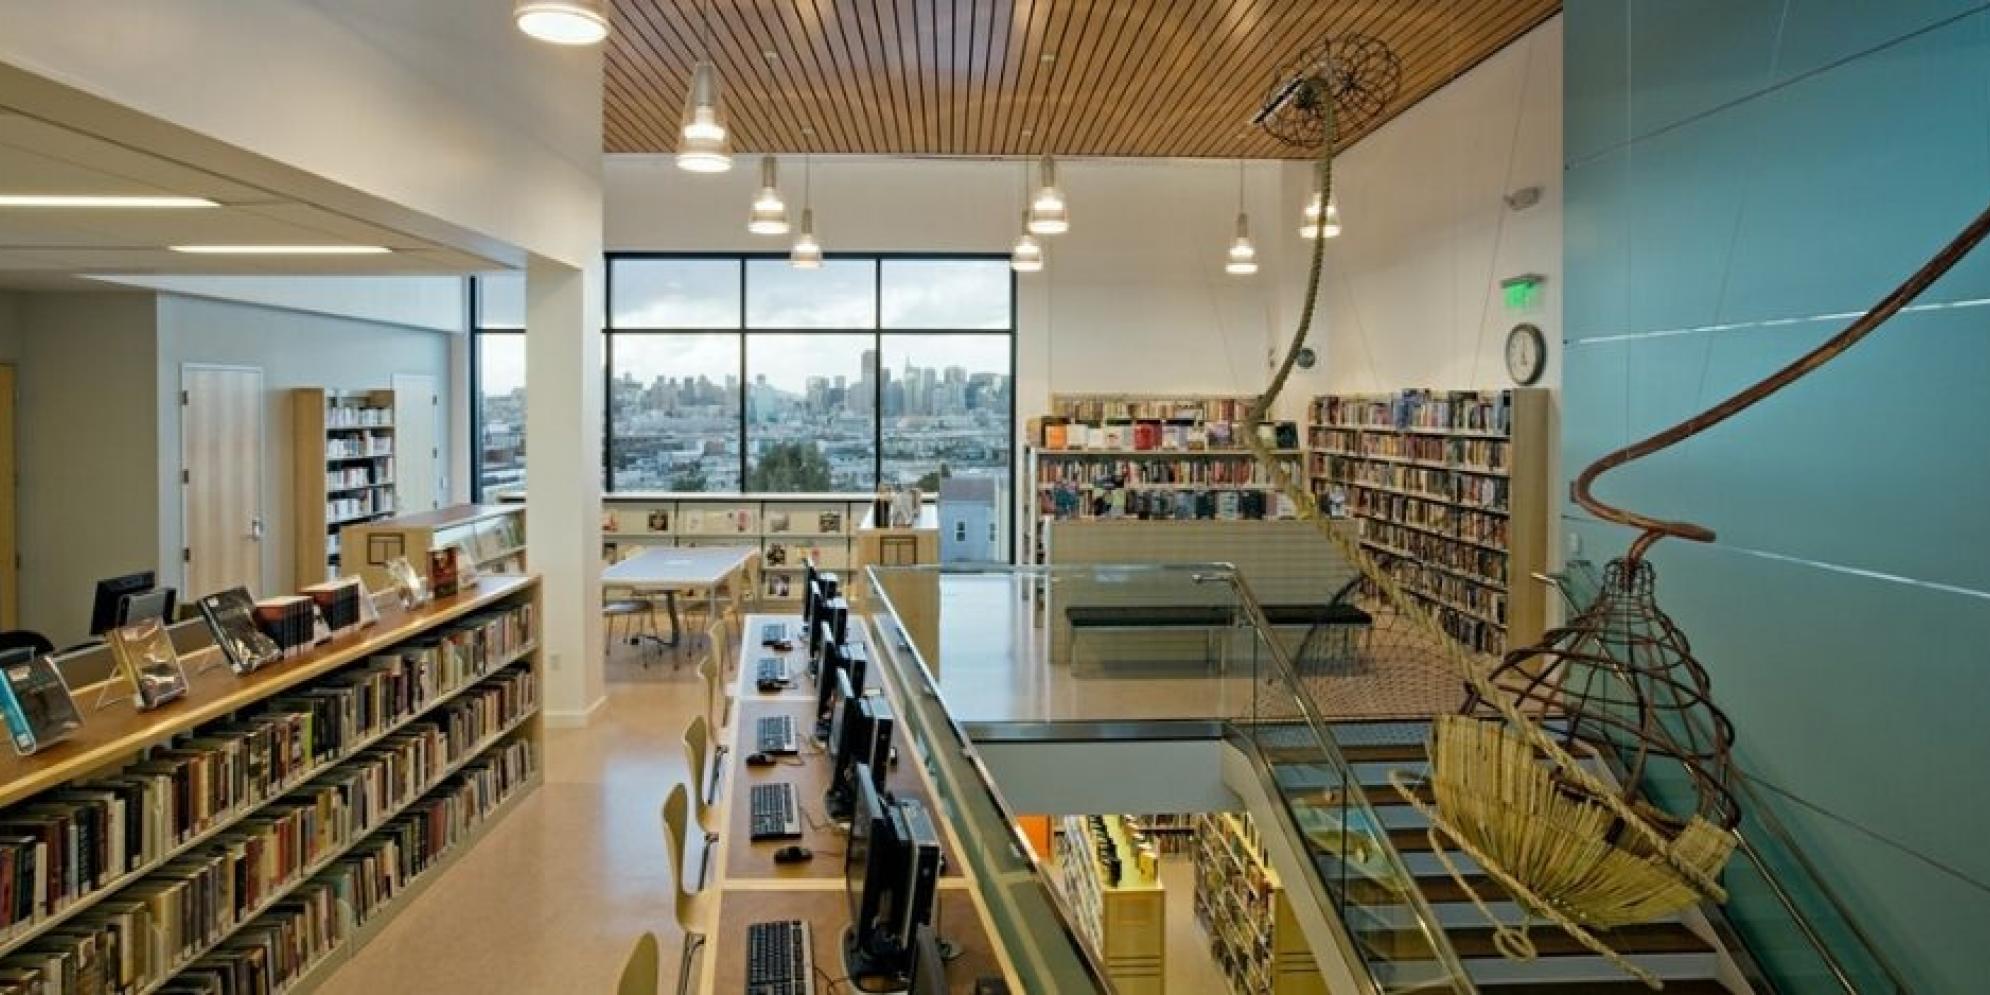 5 Incredible Chatham Community Library Examples